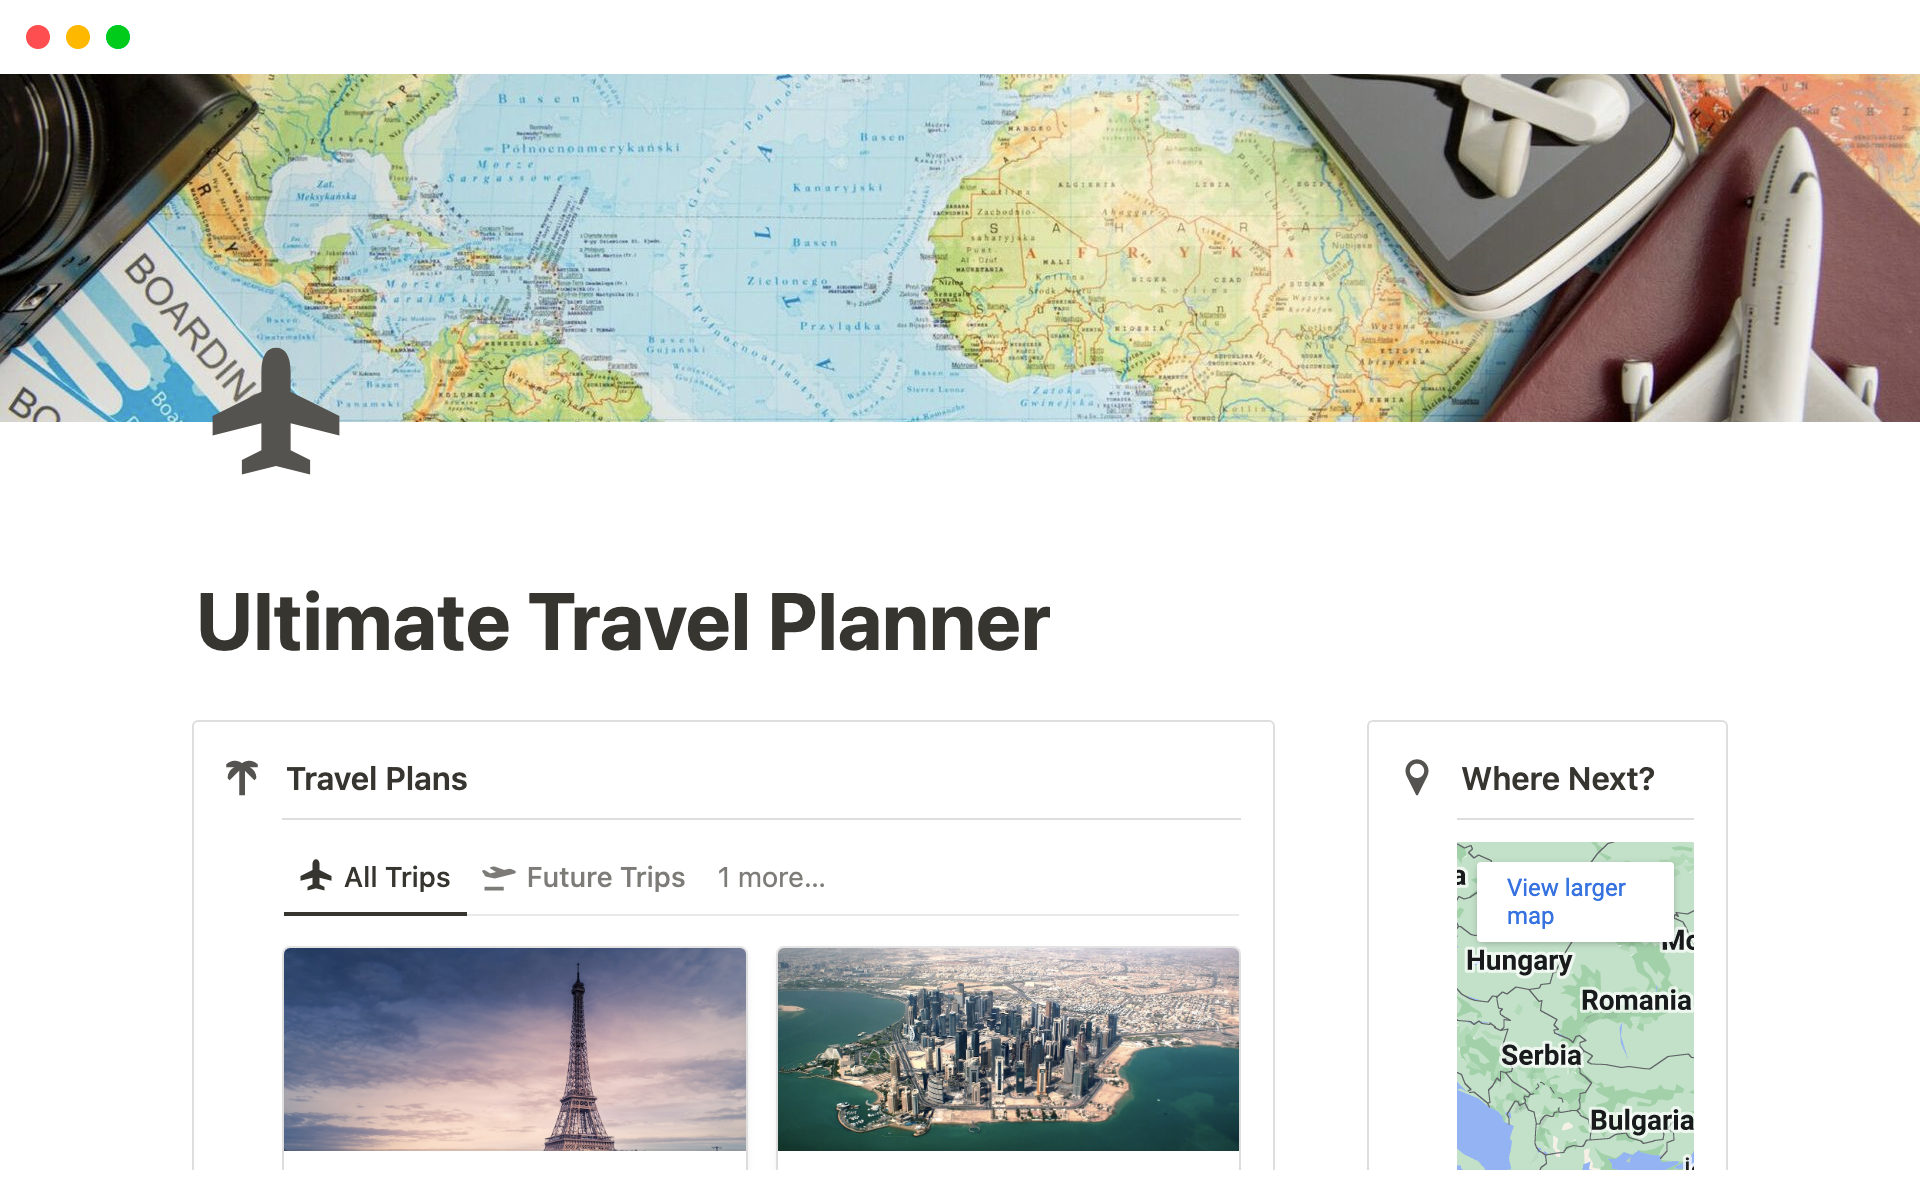 My template is a comprehensive travel planner for organizing trips, tracking expenses, creating itineraries, capturing memories, and providing travel tips.